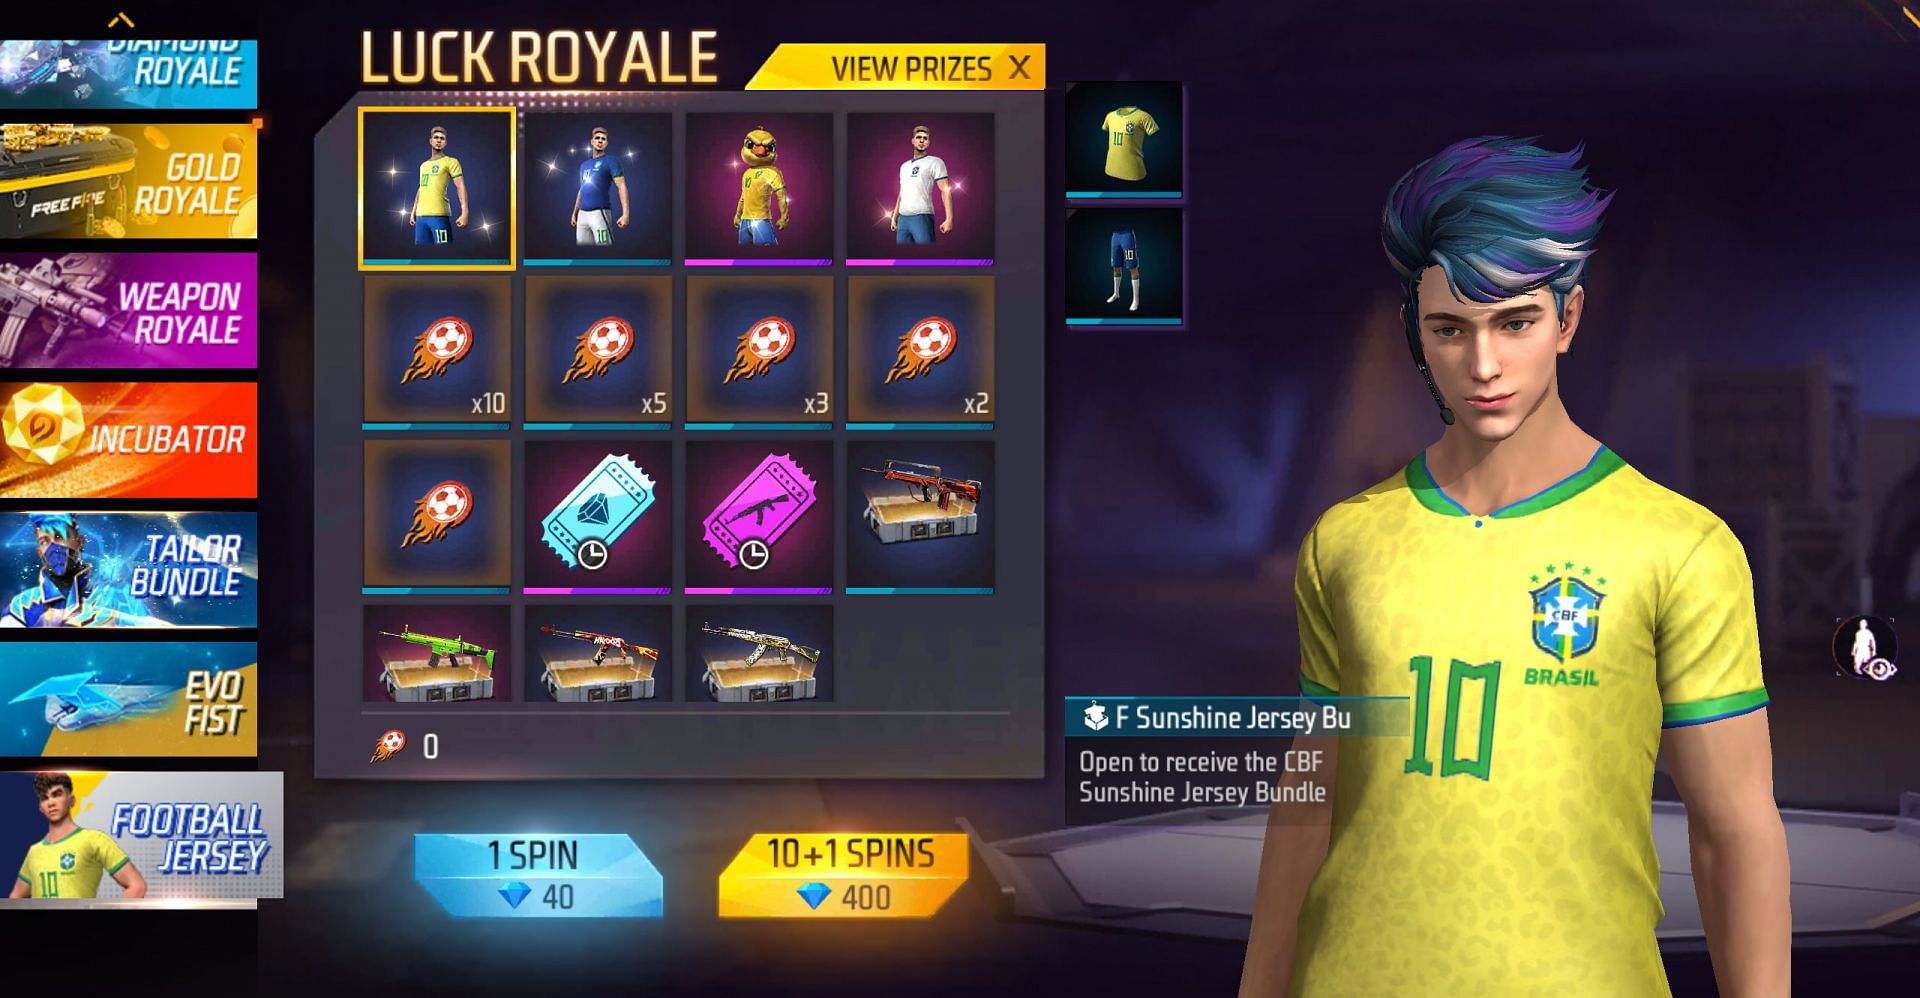 The prize pool of the current Royale (Image via Garena)